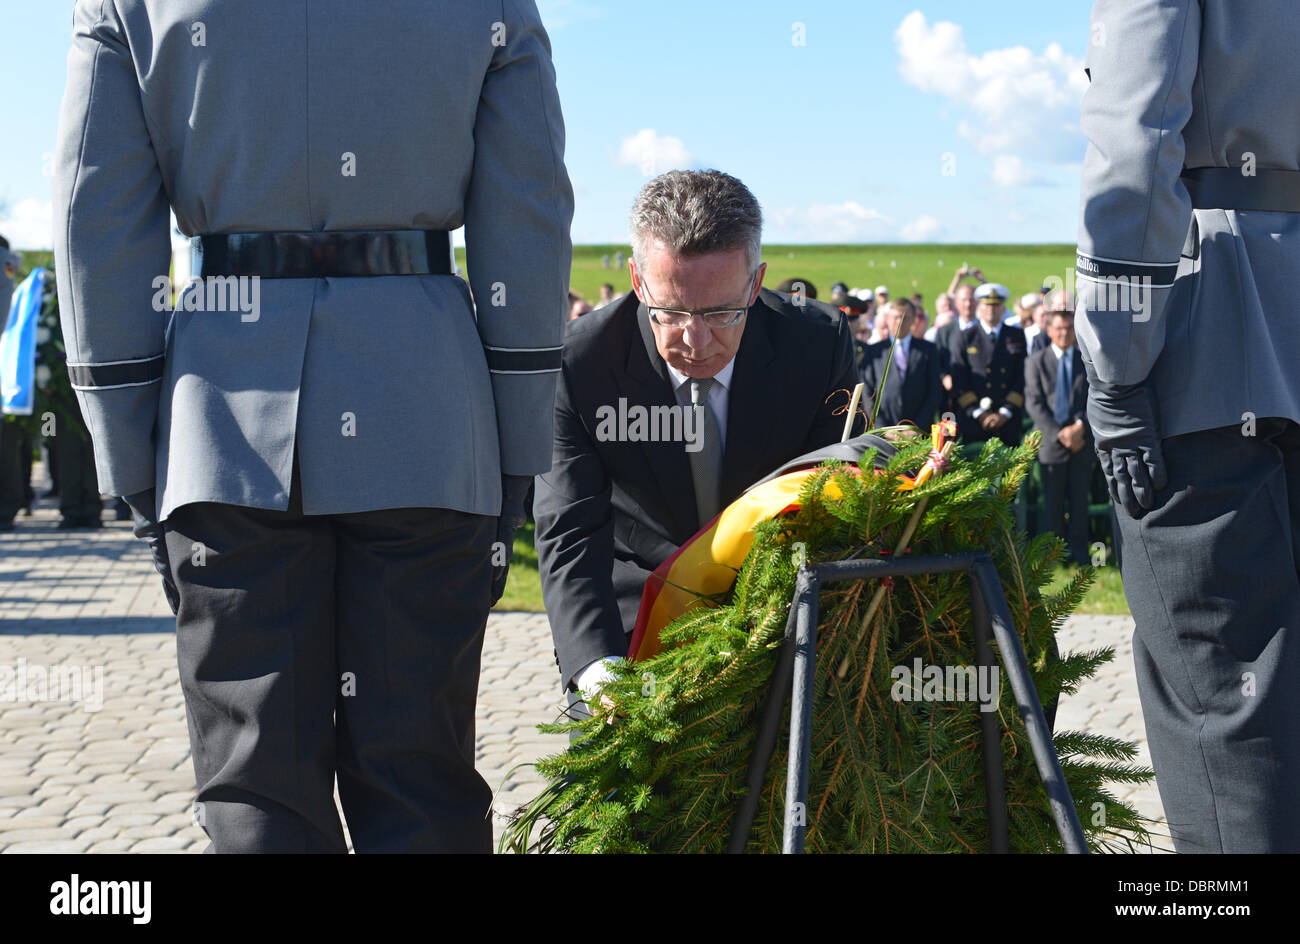 German Defence Minister Thomas de Maiziere (C) lays a wreath during the dedication of the German military cemetery in Dukhovshchina, Smolensk Oblast, Russia, 03 August 2013. The cemetery is the last resting place for 70,000 German soldiers who died in Russia during World War II. Photo: UWE ZUCCHI Stock Photo